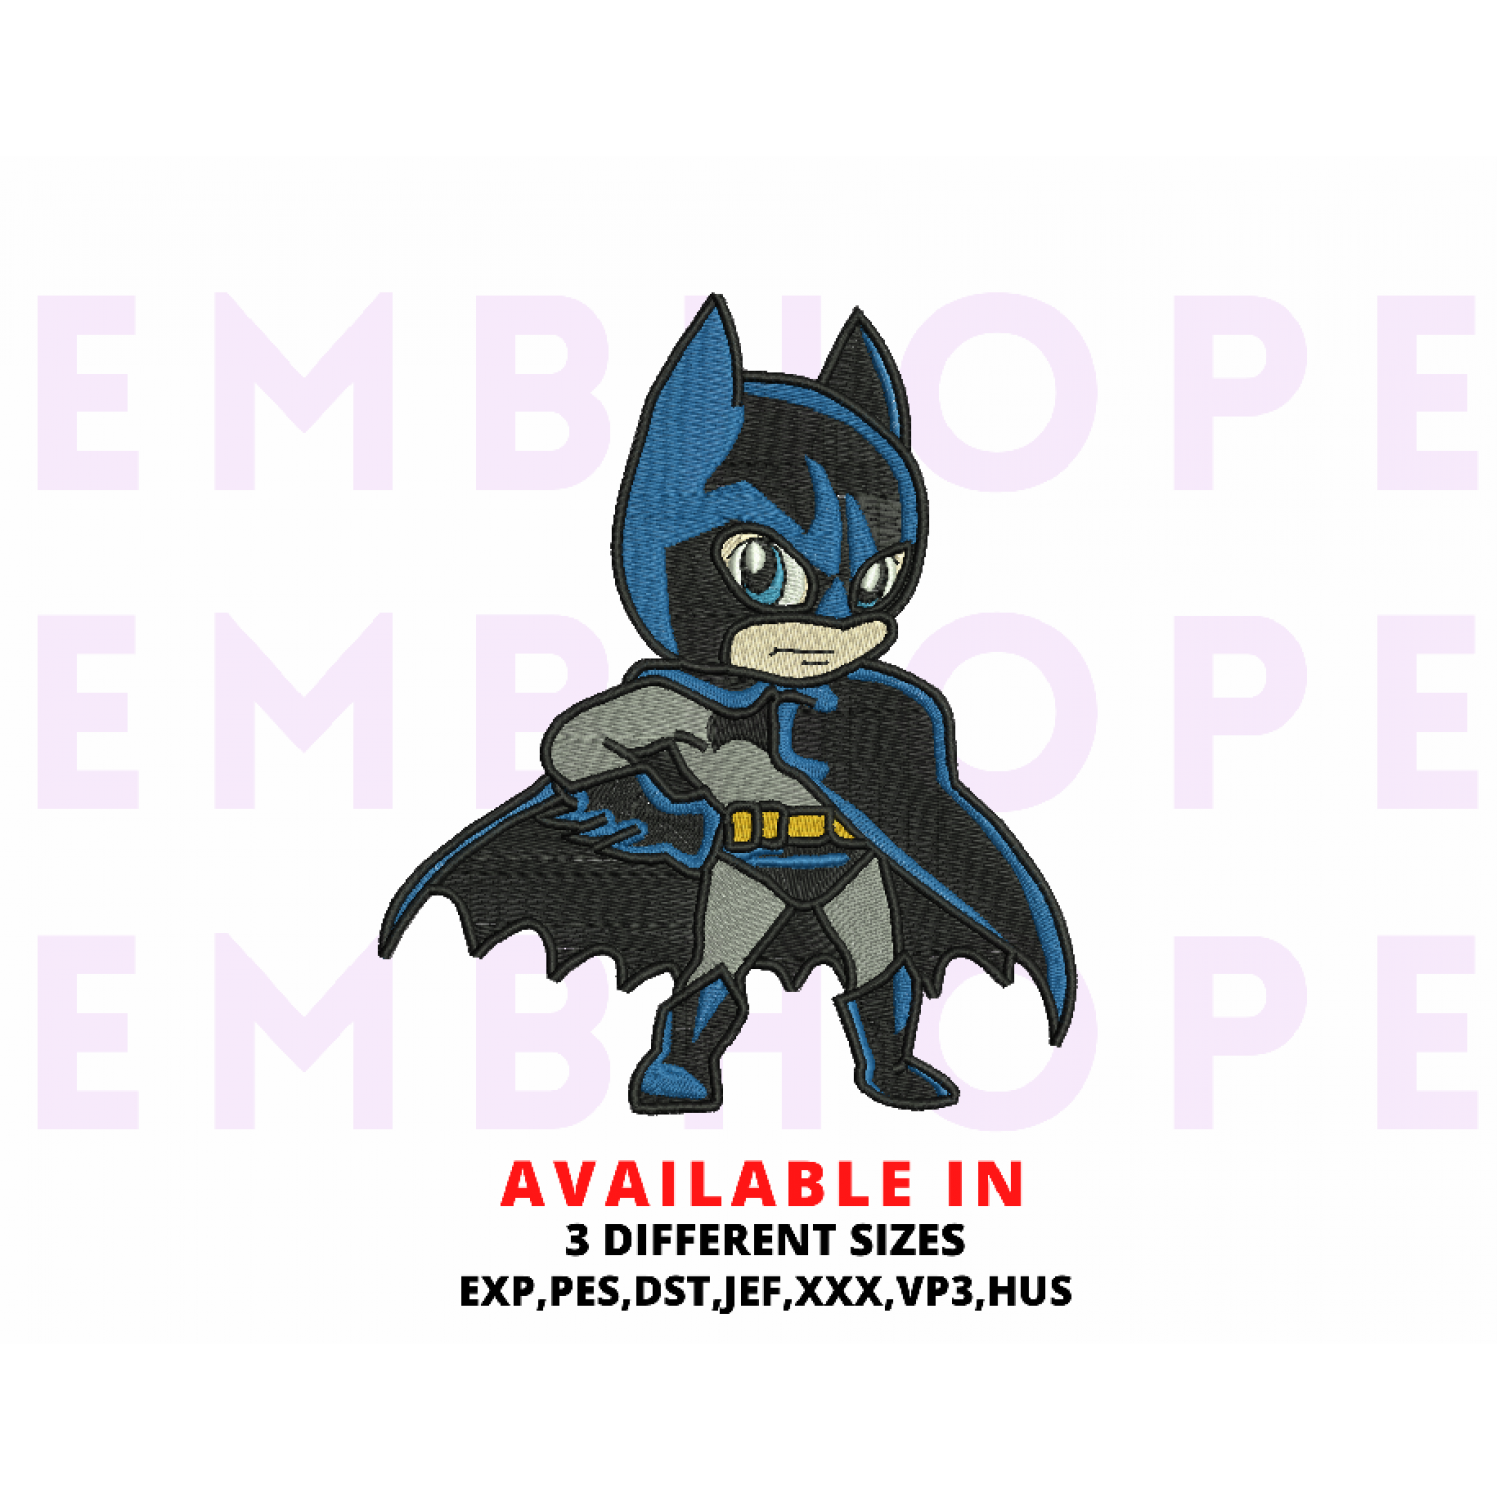 Batman Kids Embroidery Design, Superhero Embroidery Design, Embroidery File, Instant Download